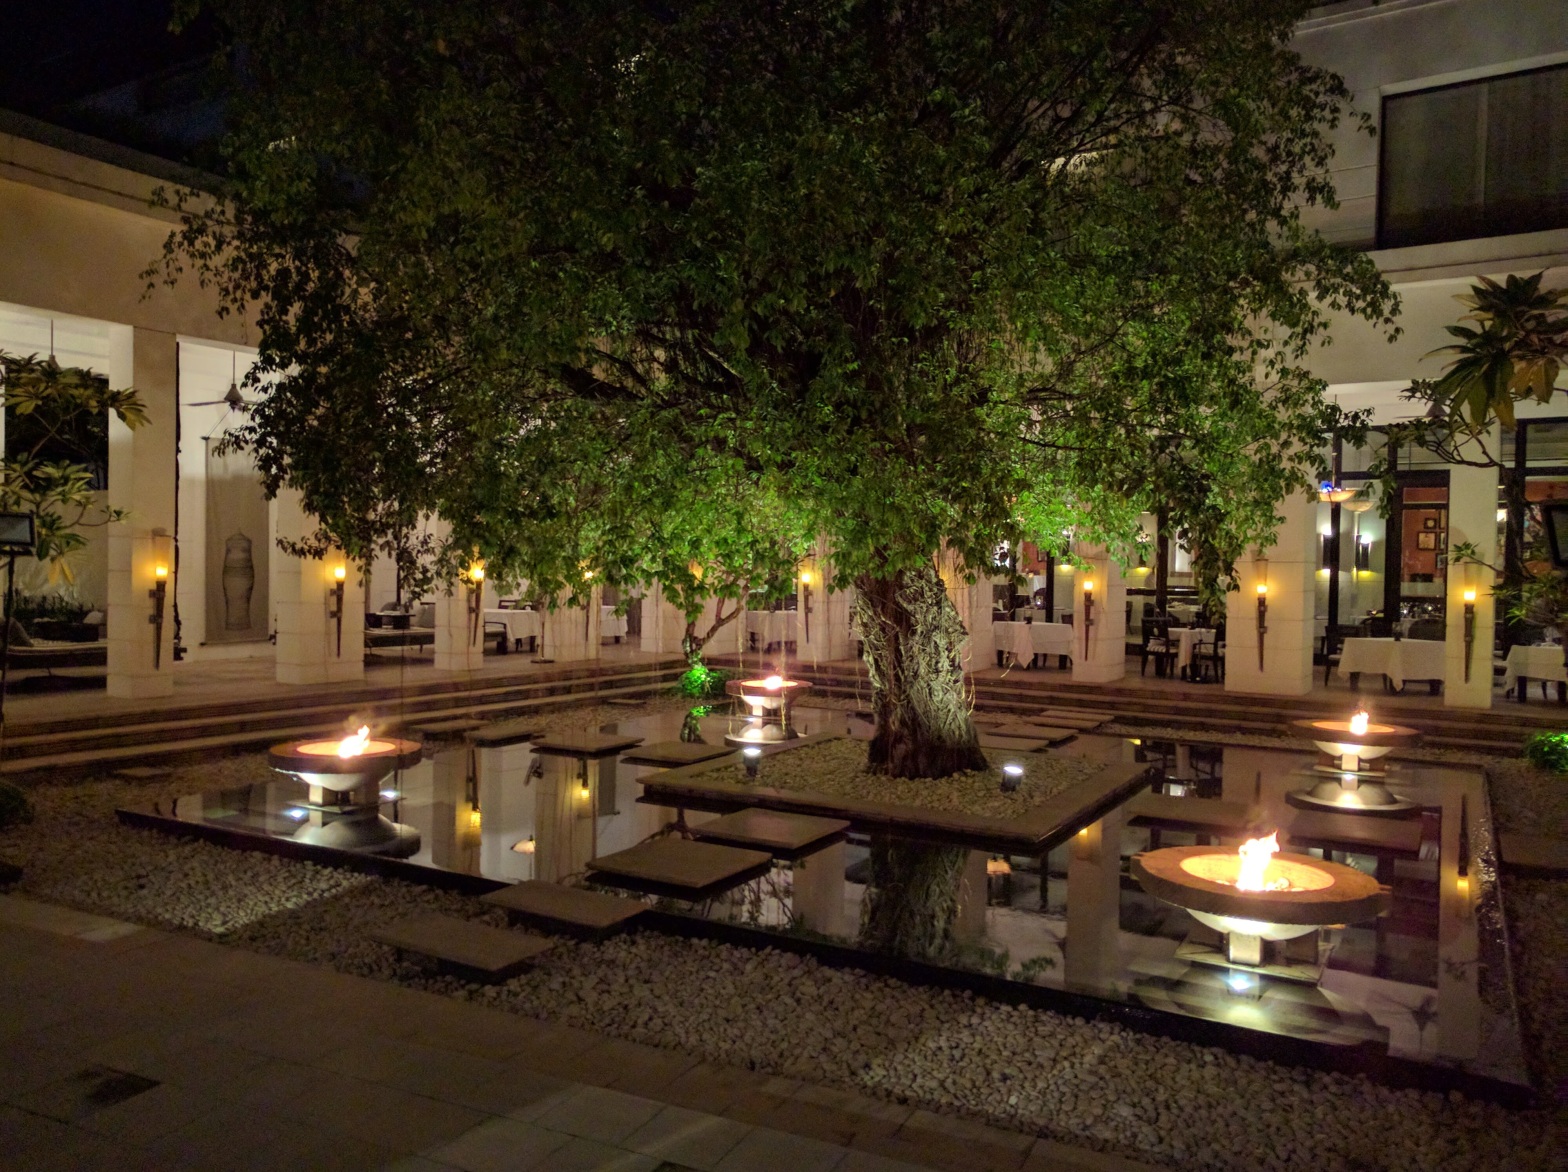 Park Hyatt Siem Reap: view of the courtyard and bar/restaurant area at night